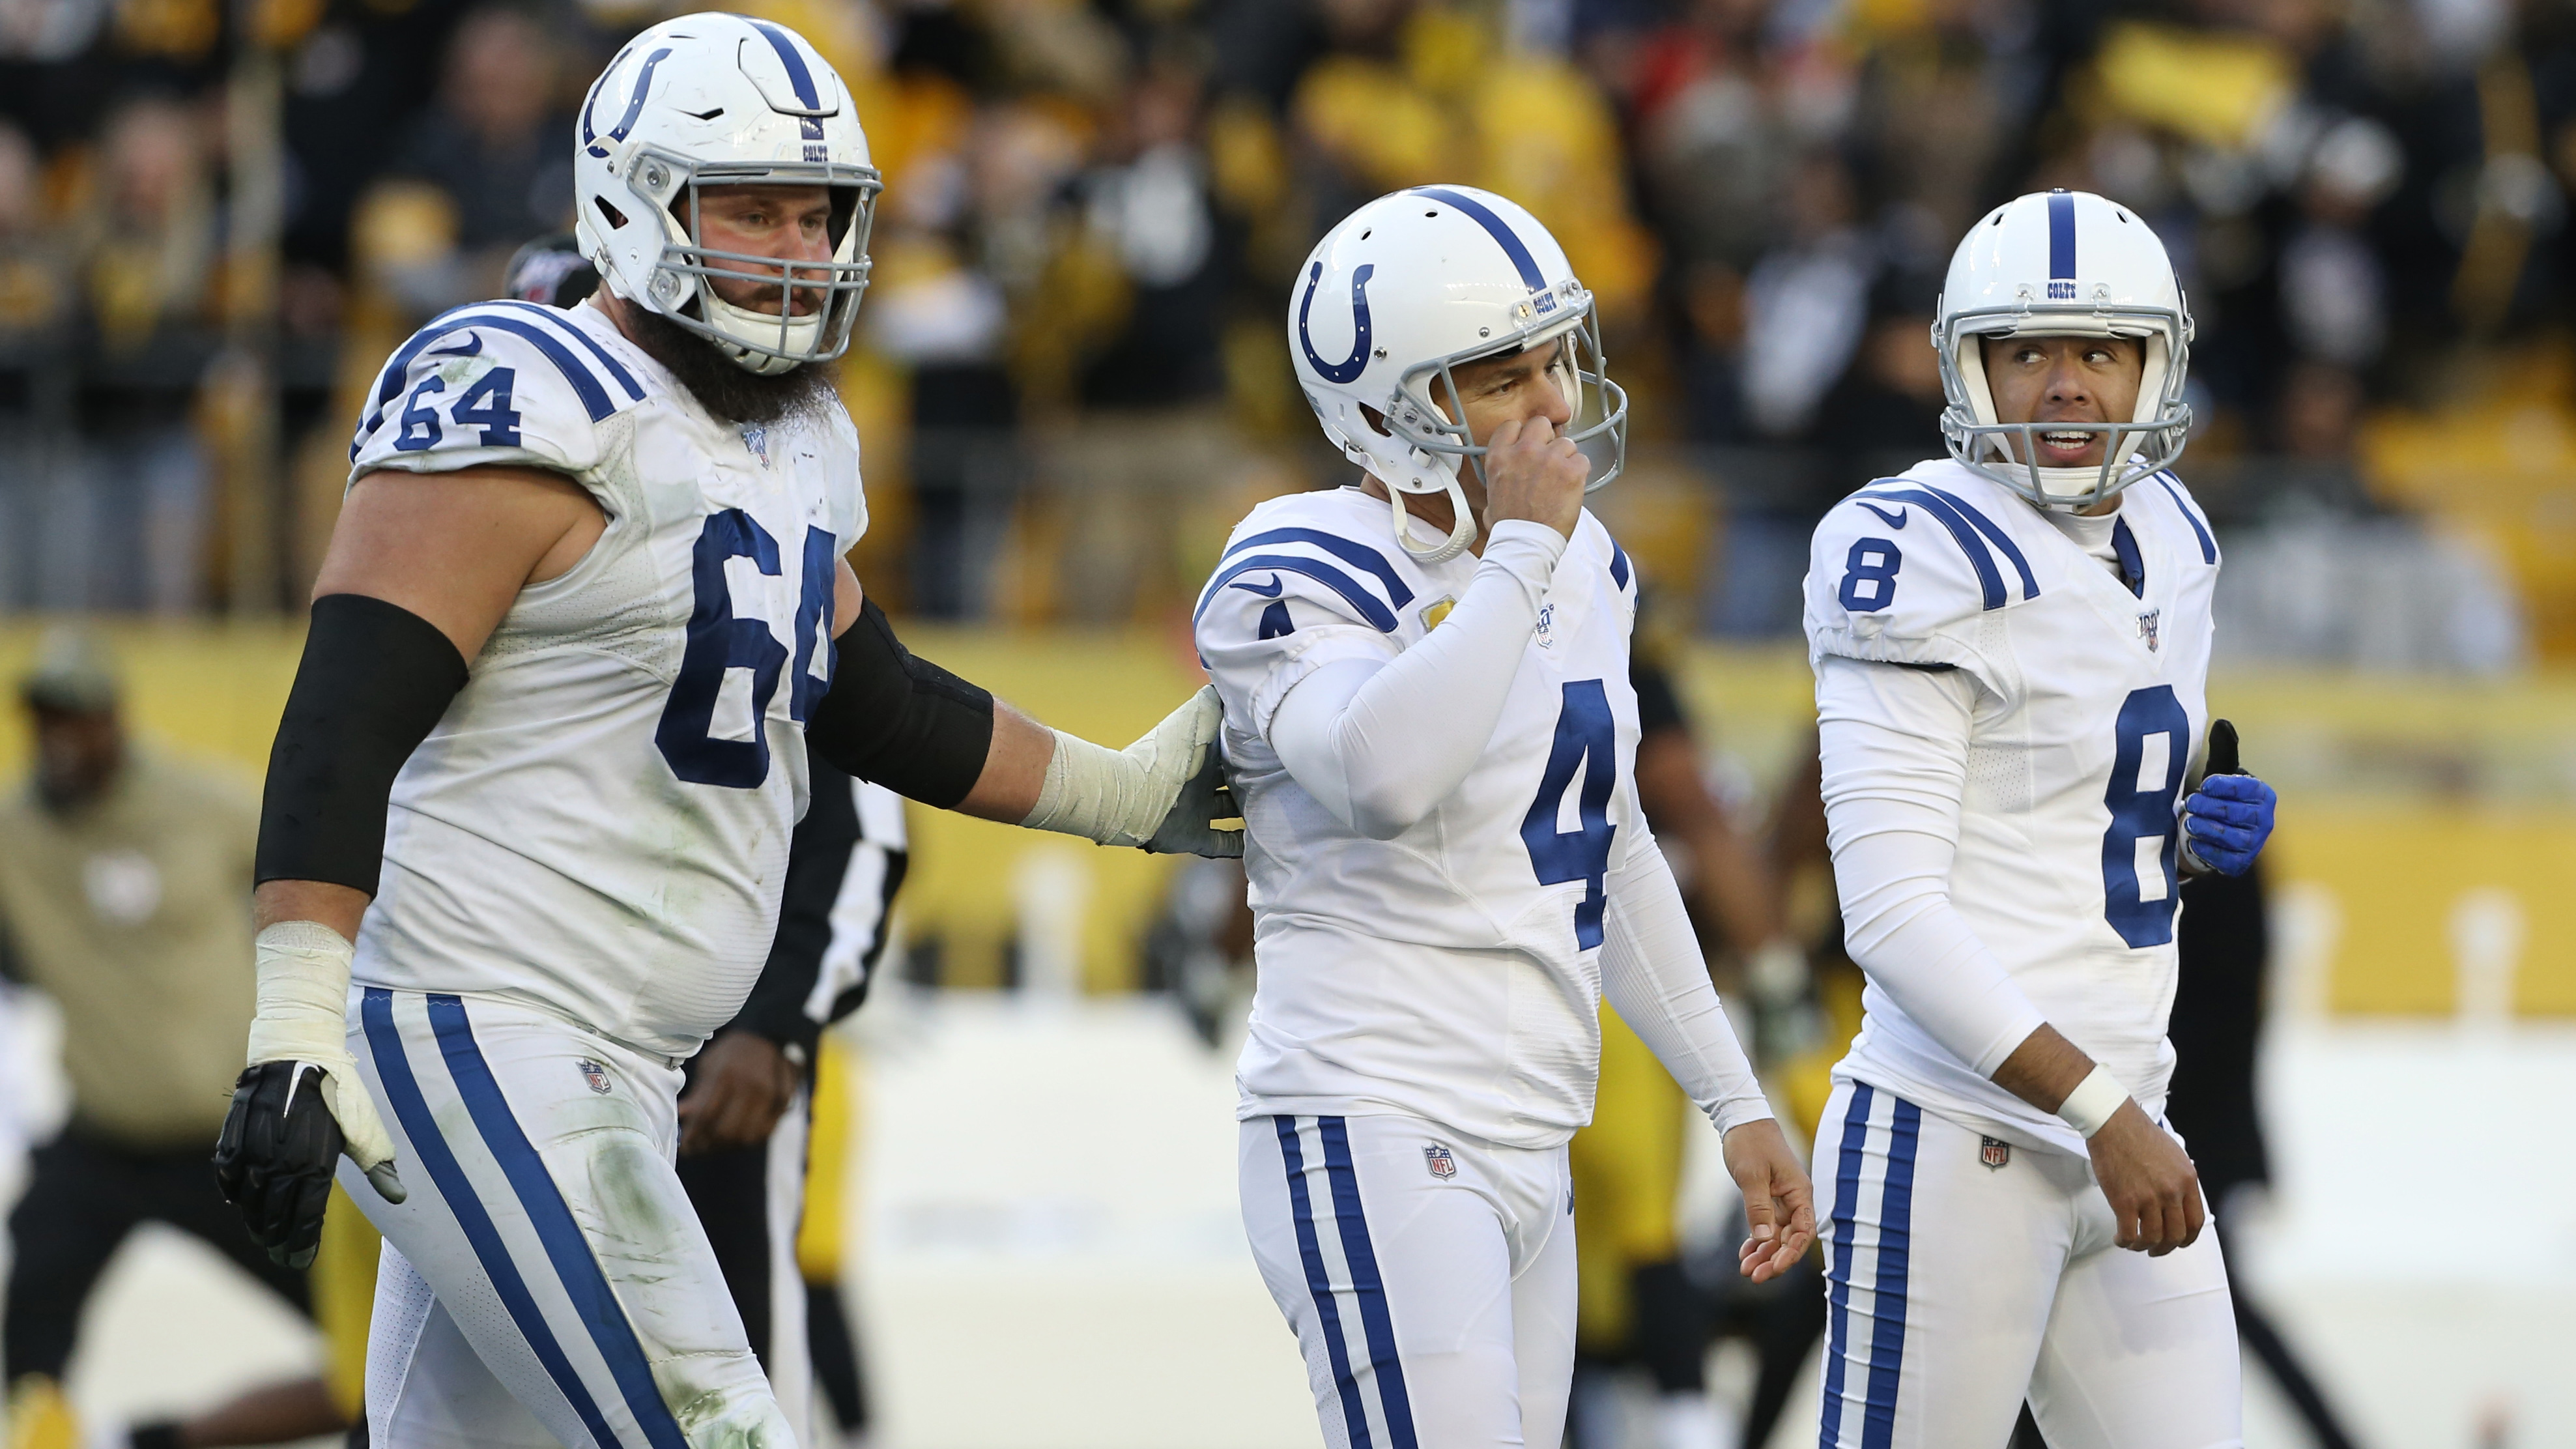 Reich maintains 'all of the confidence in the world' in Vinatieri despite another crucial miss